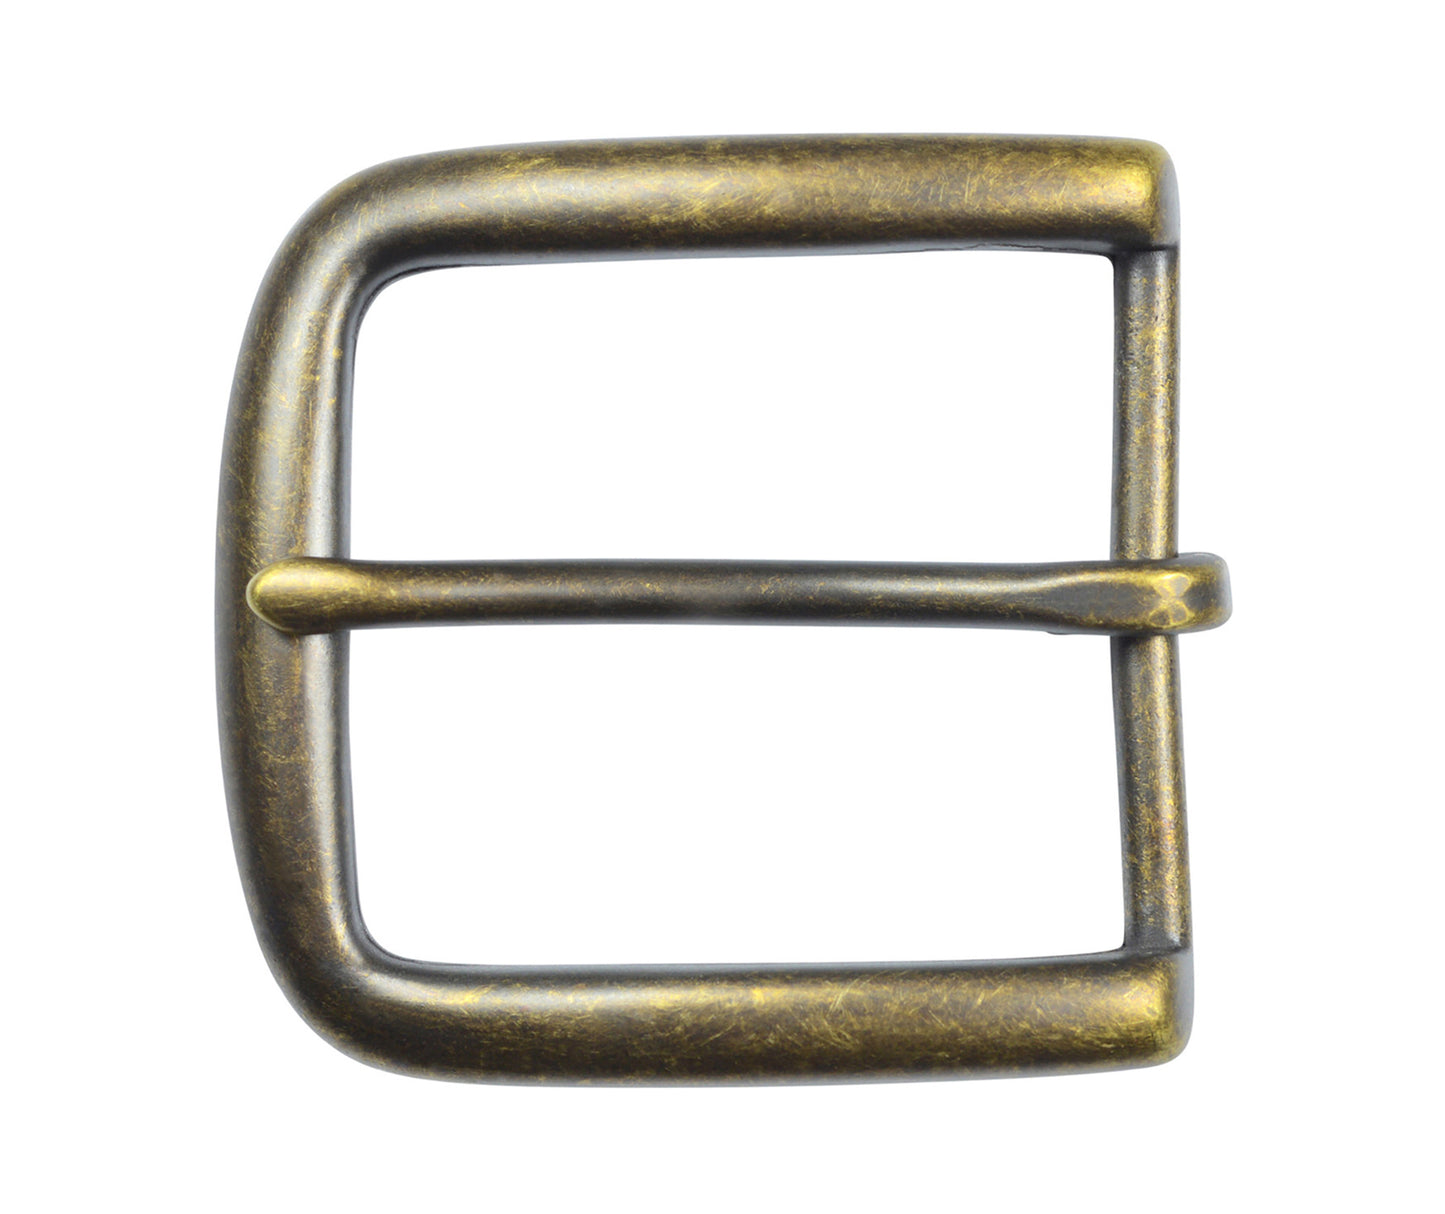 TBS-11082 Antique Copper Pin Buckle fits 1.5" or 38mm Belts